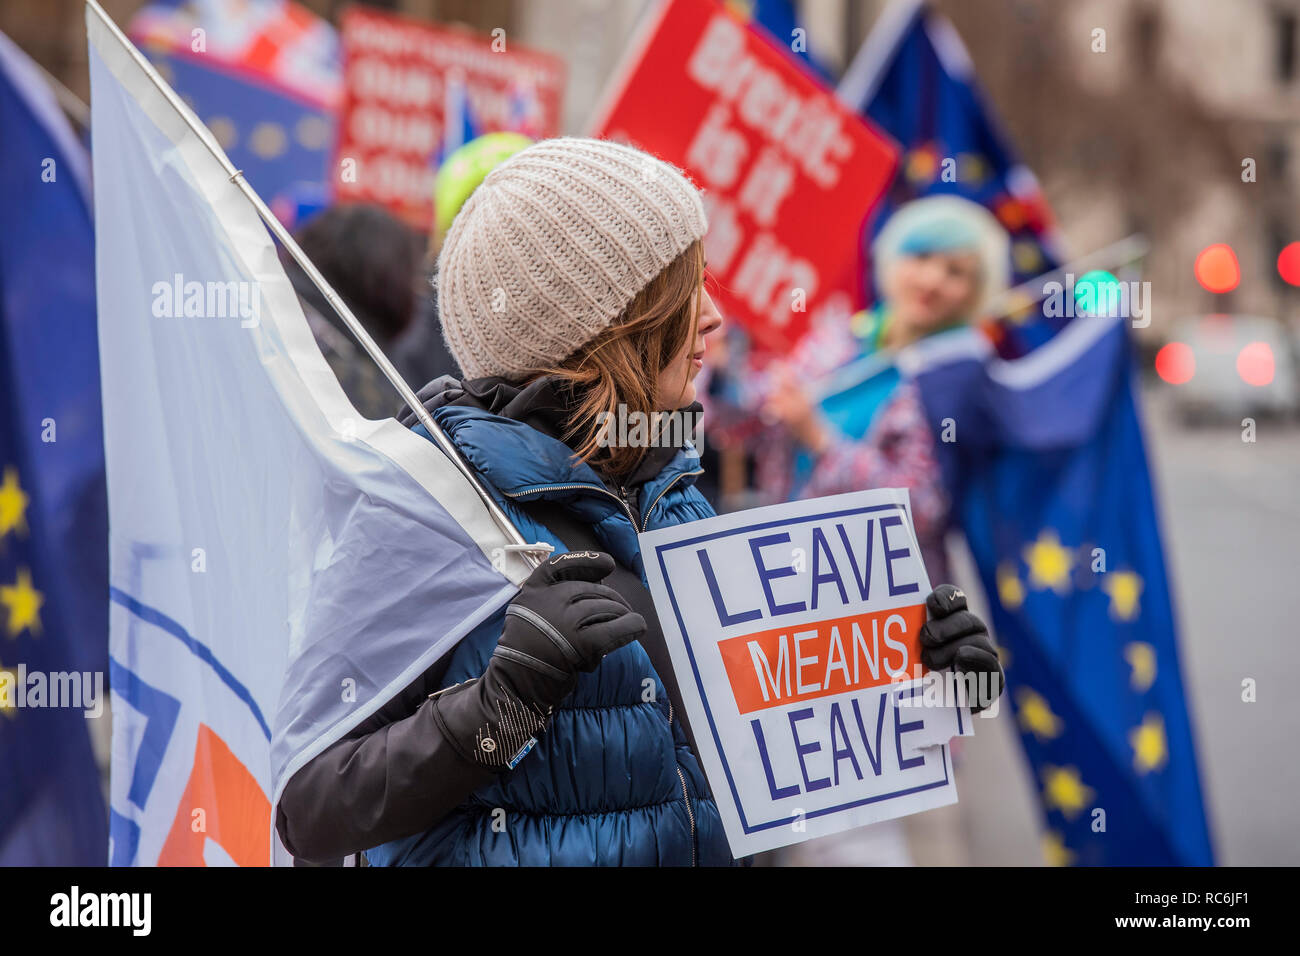 London, UK. 14th January, 2019. A woman, against the increasing centralisation of the EU, is diappointed in Parliament and is frustrated that she feels she has to come and protest against the possibility that the referendum result will be overturned - Leave means leave and SODEM, pro EU, protestors continue to make their points, side by side, outside Parliament as the vote on Theresa May's plan is due the next day. Credit: Guy Bell/Alamy Live News Stock Photo